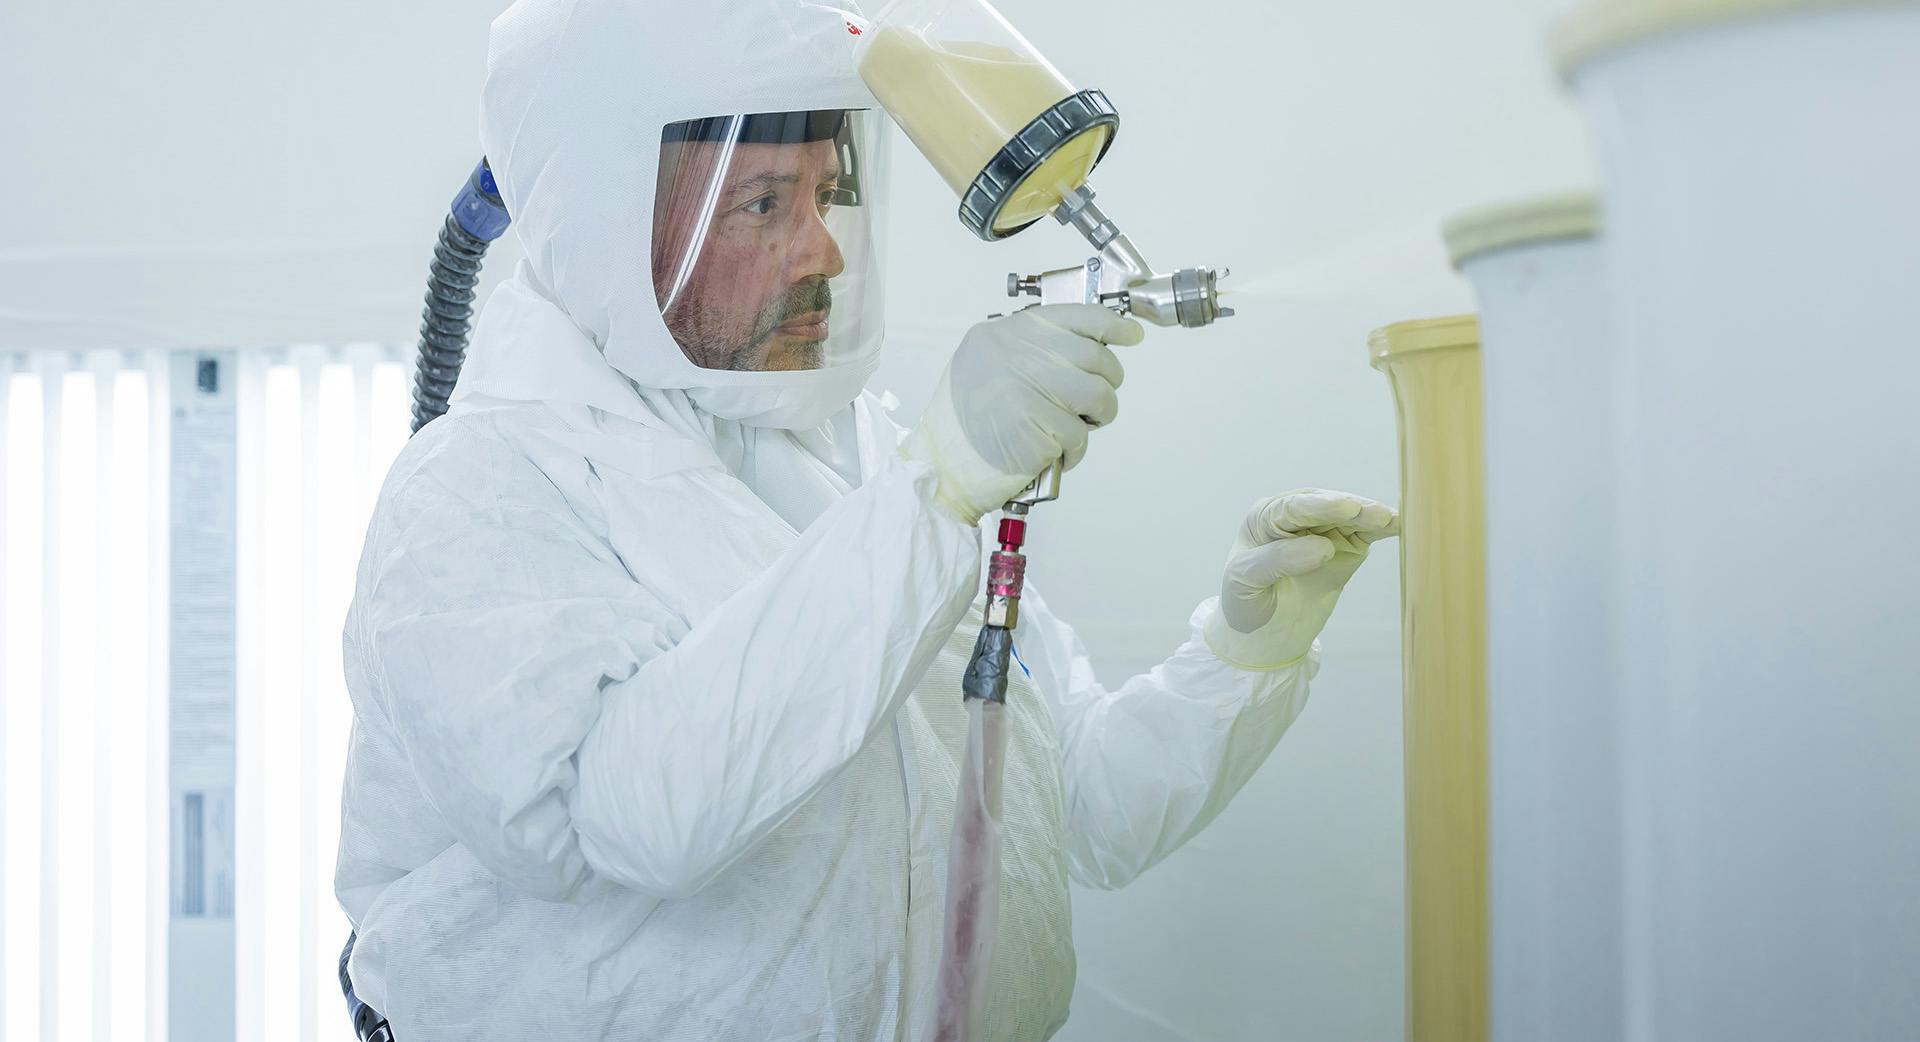 Engineer using a paint sprayer to paint components